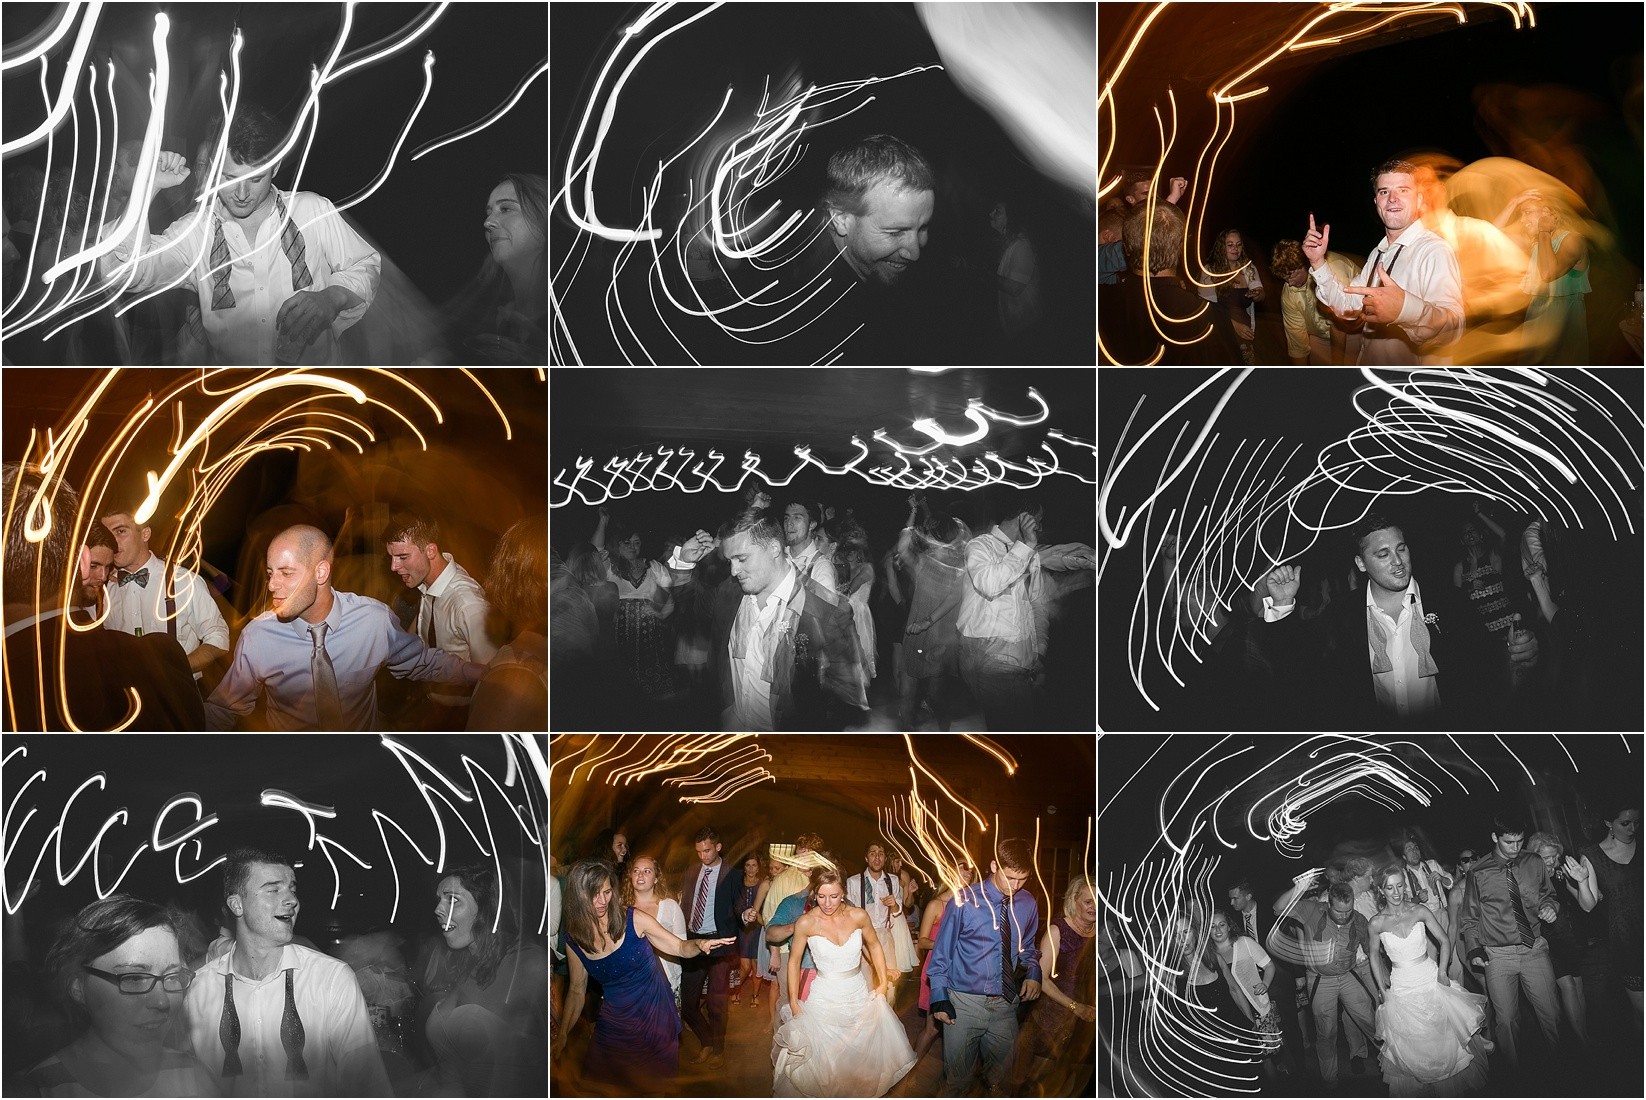 shutter dra dancing during their wedding at the Historic Rural Hill wedding ceremony and reception in Huntersville nc